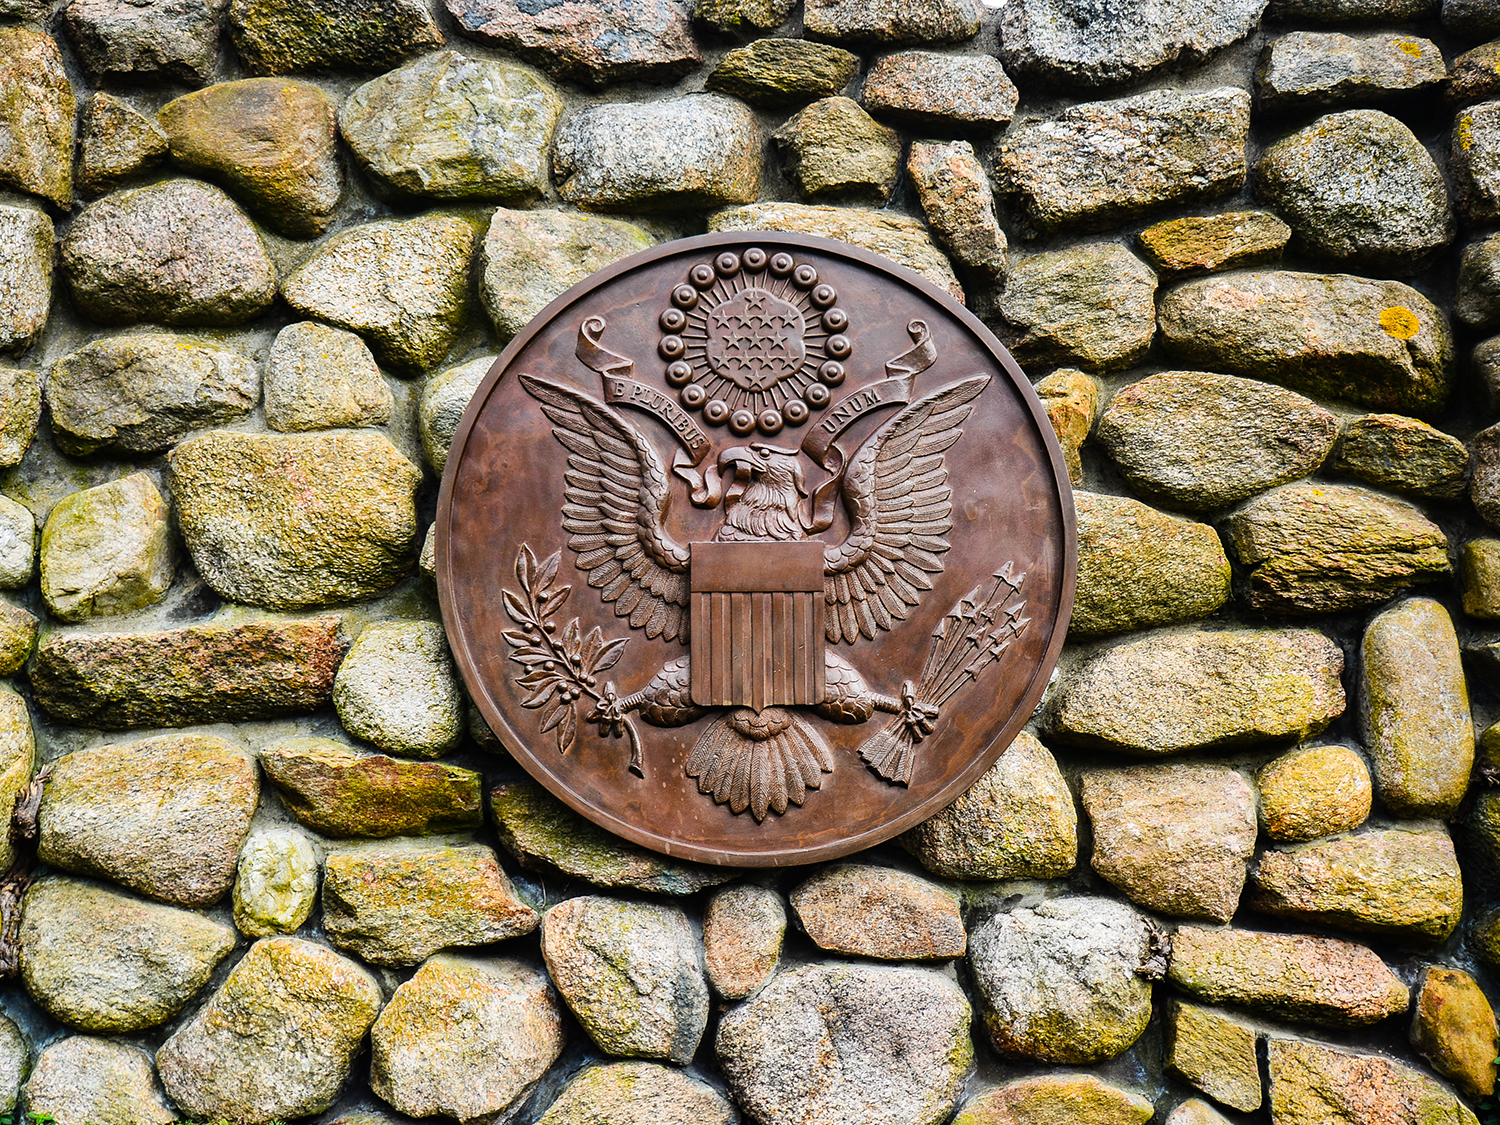 Bronze presidential seal mounted on a wall made of stones.